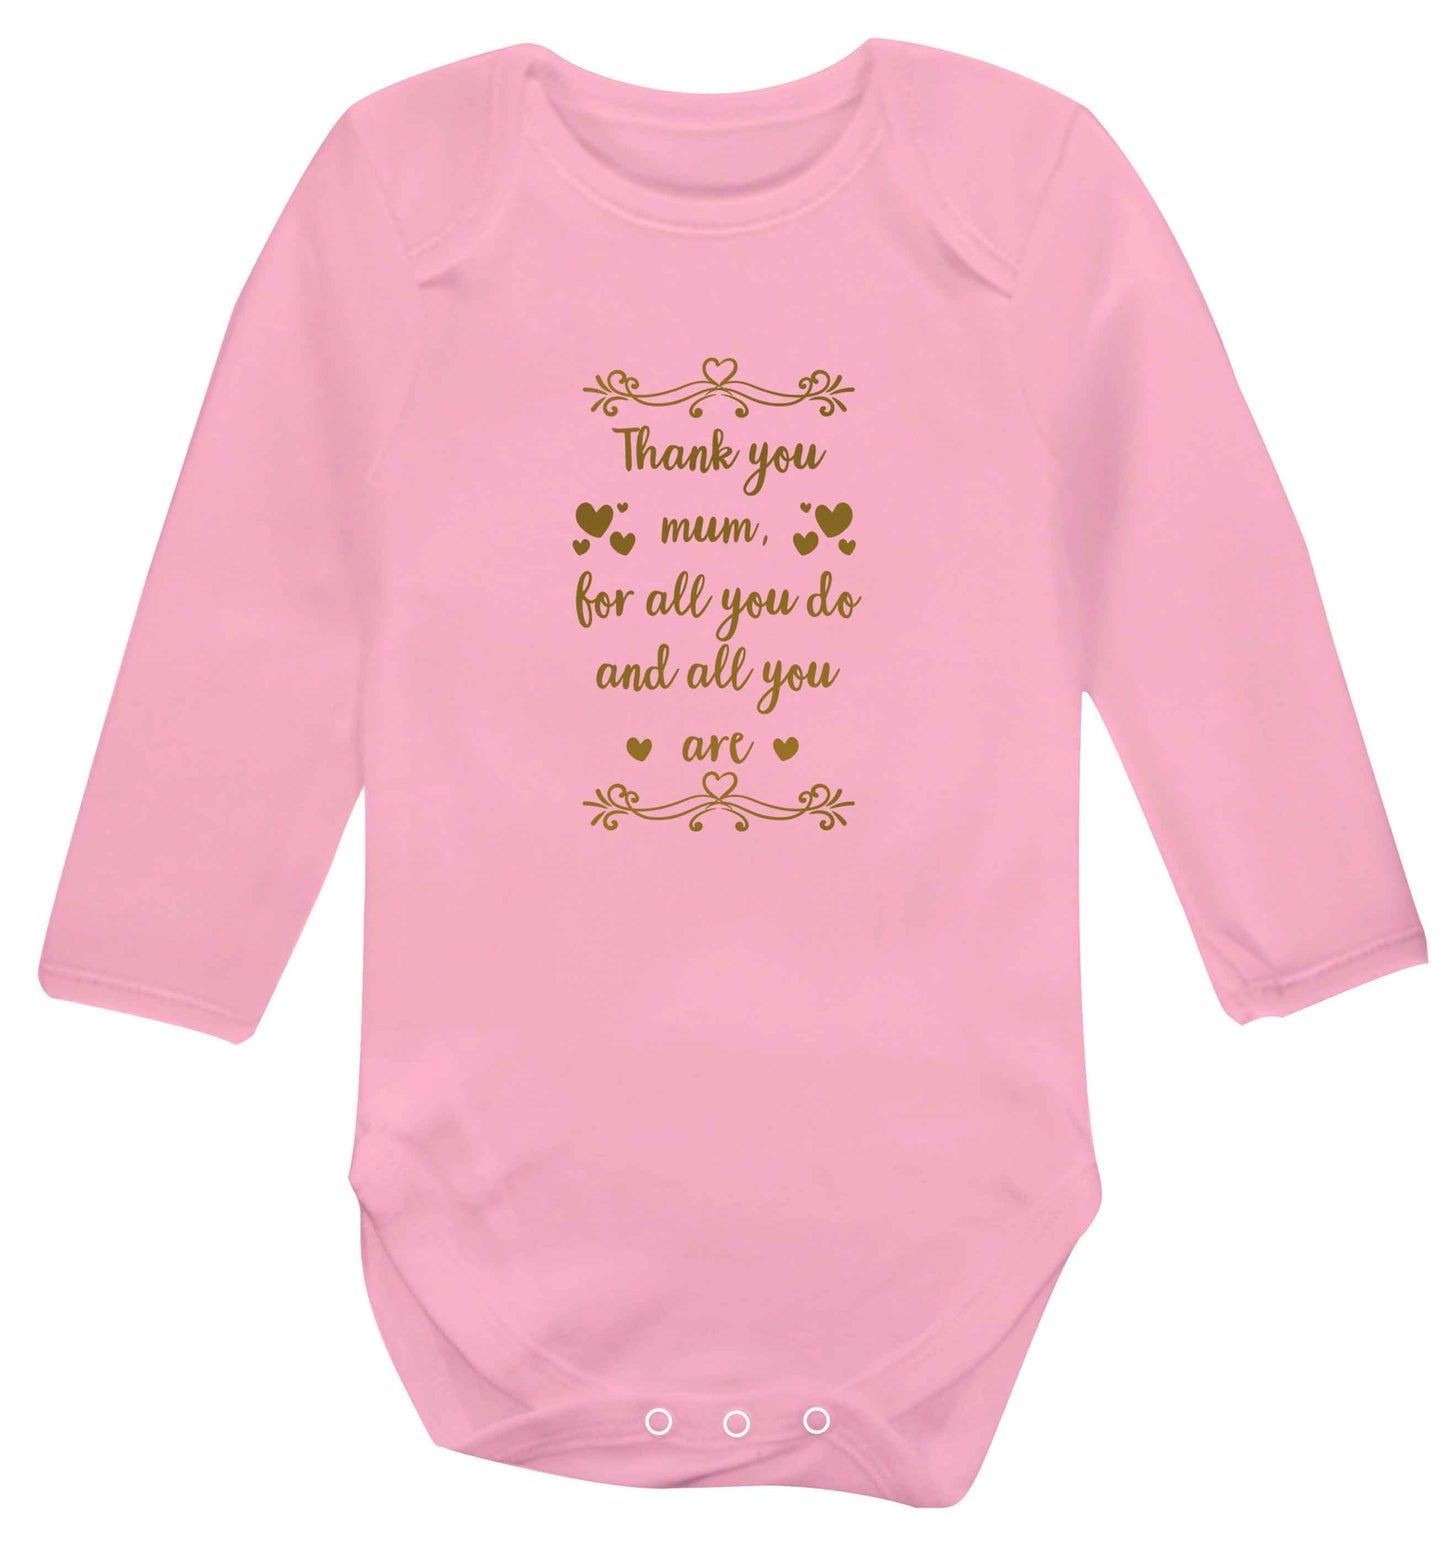 Gorgeous gifts for mums on mother's day! Thank you mum for all you do and all you are baby vest long sleeved pale pink 6-12 months